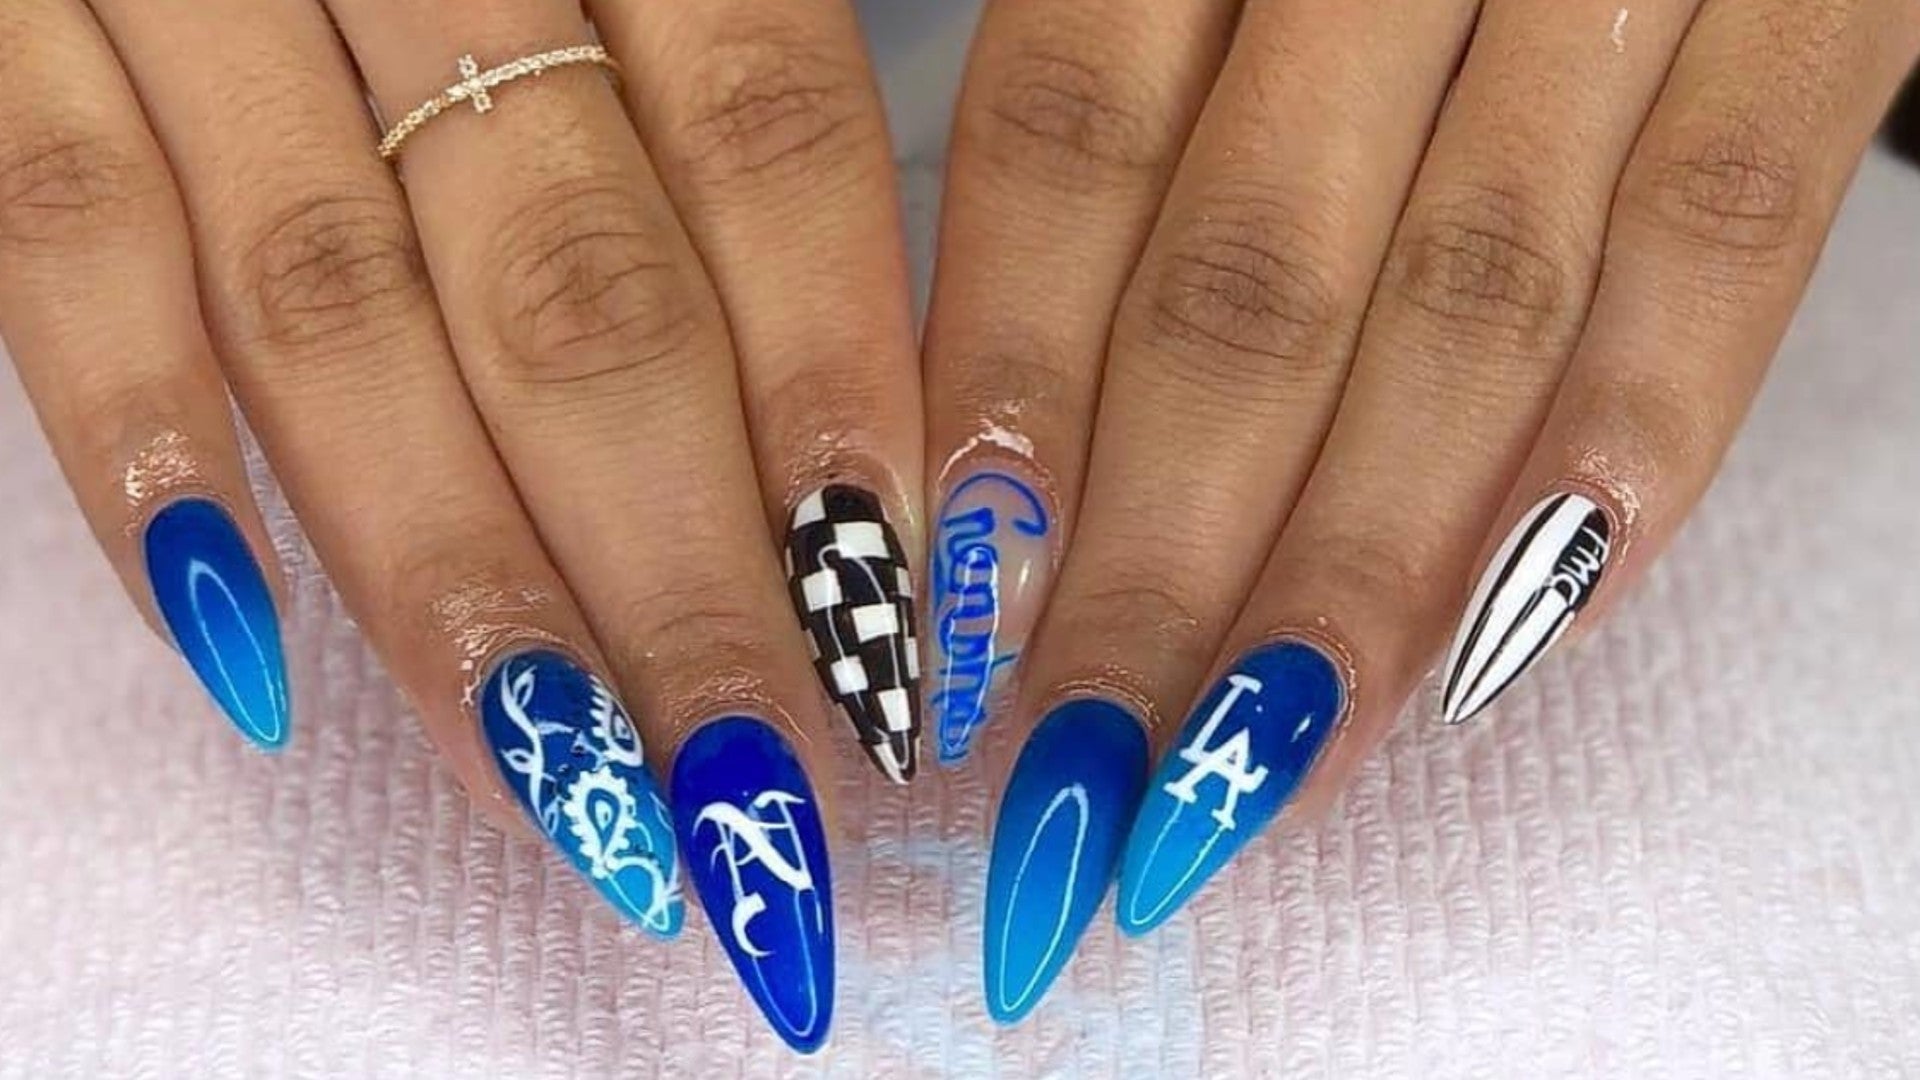 20 Times We Loved How The Late Nipsey Hussle Was Memorialized On Nails In 2019